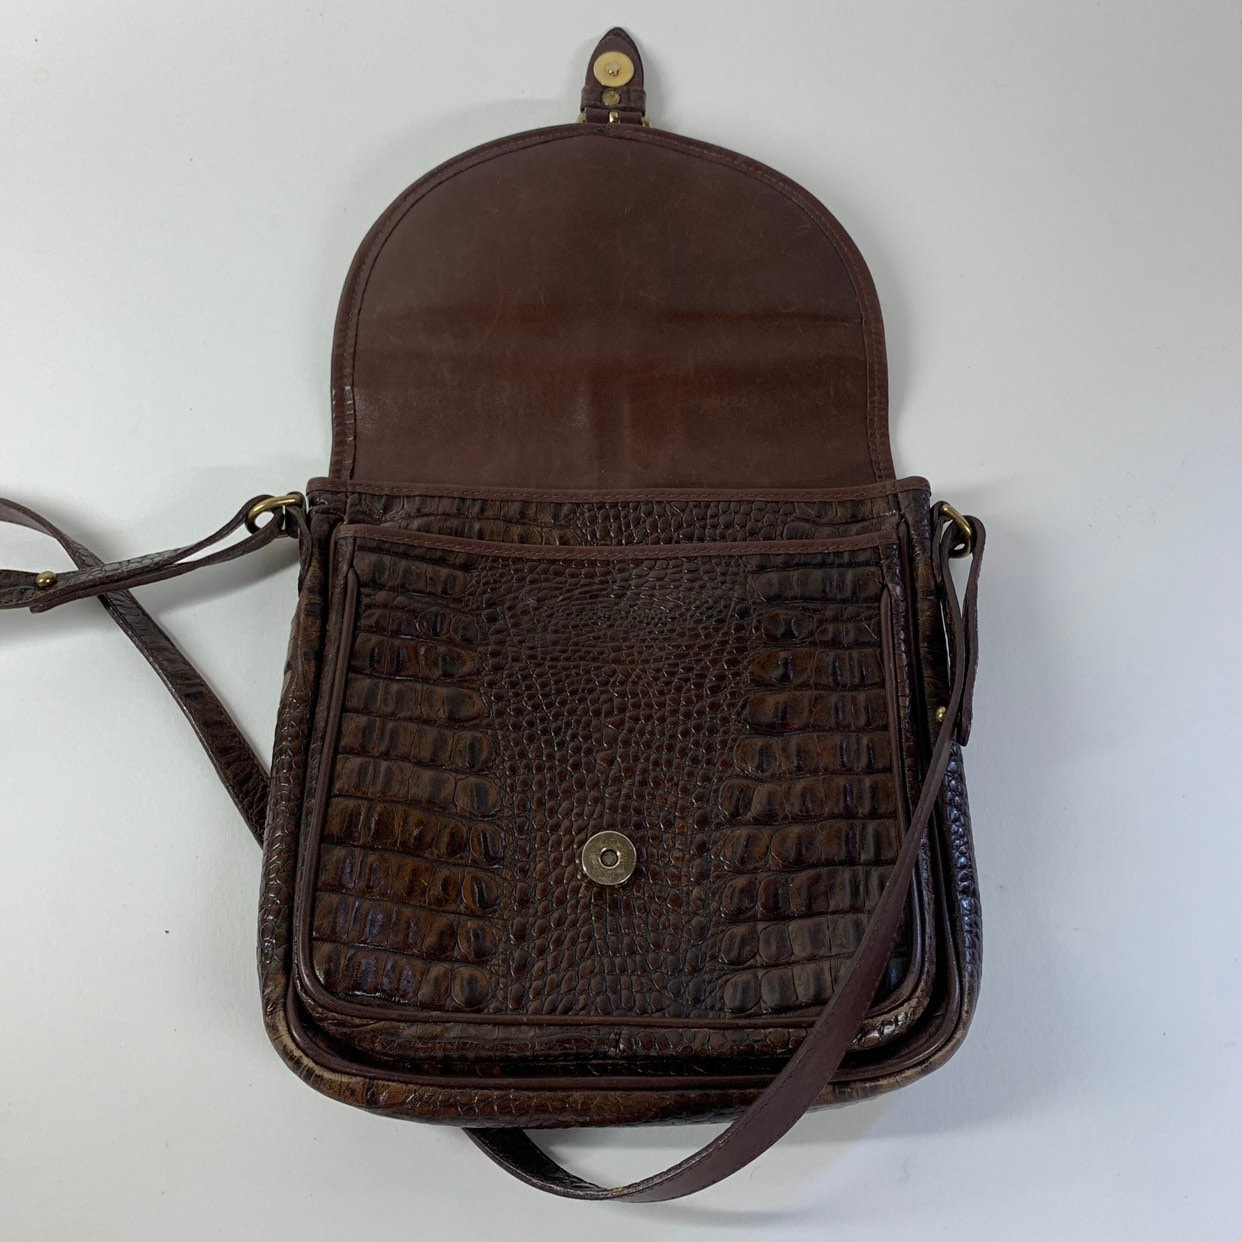 Brahmin - Authenticated Handbag - Leather Brown Crocodile for Women, Very Good Condition